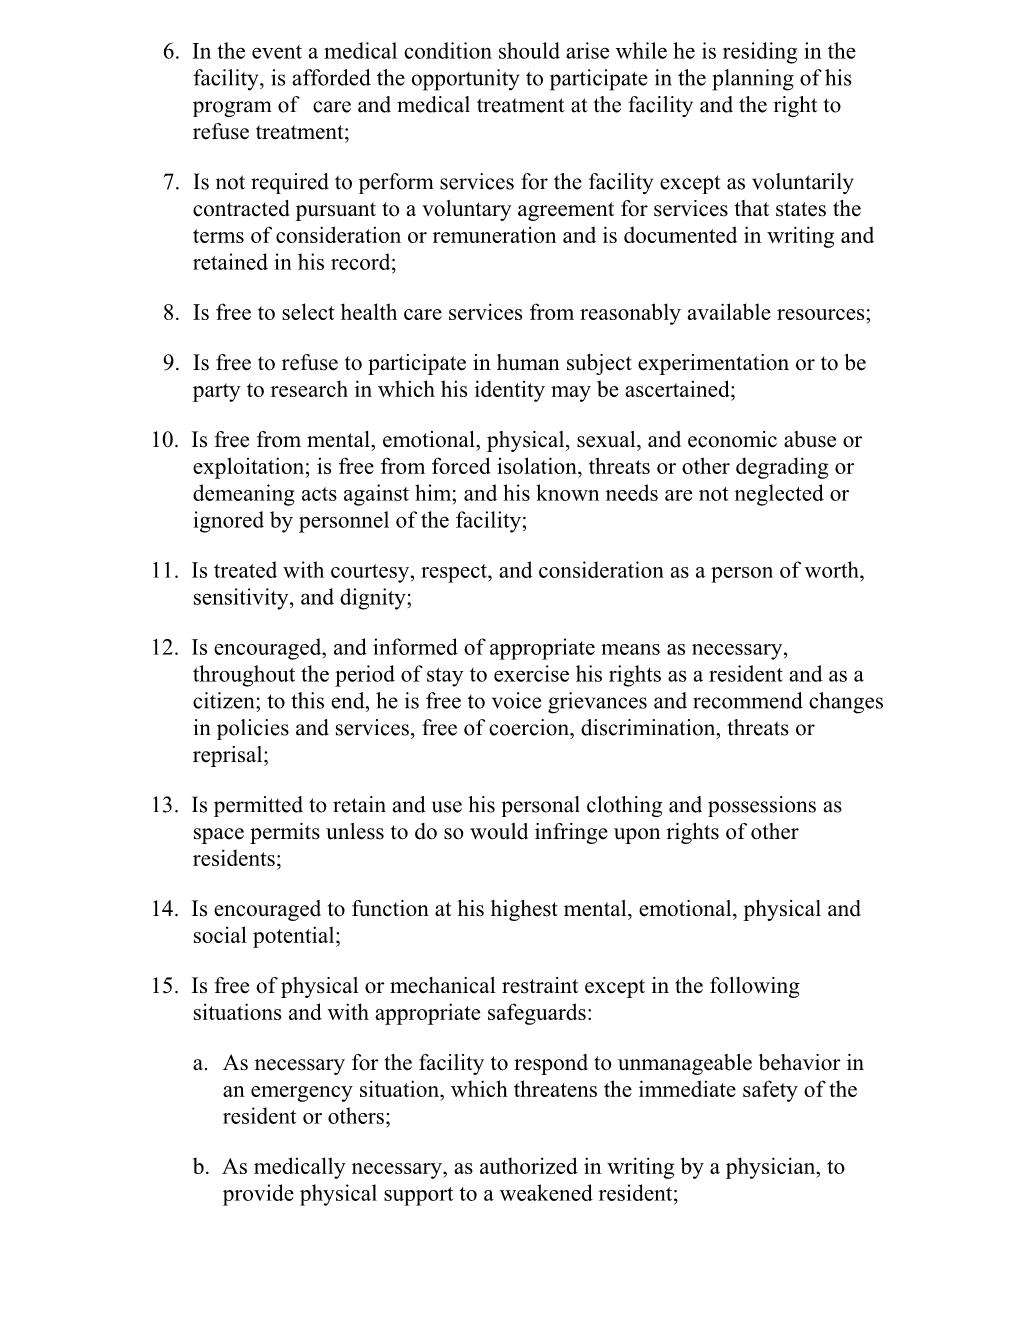 Rights and Responsibilities Of